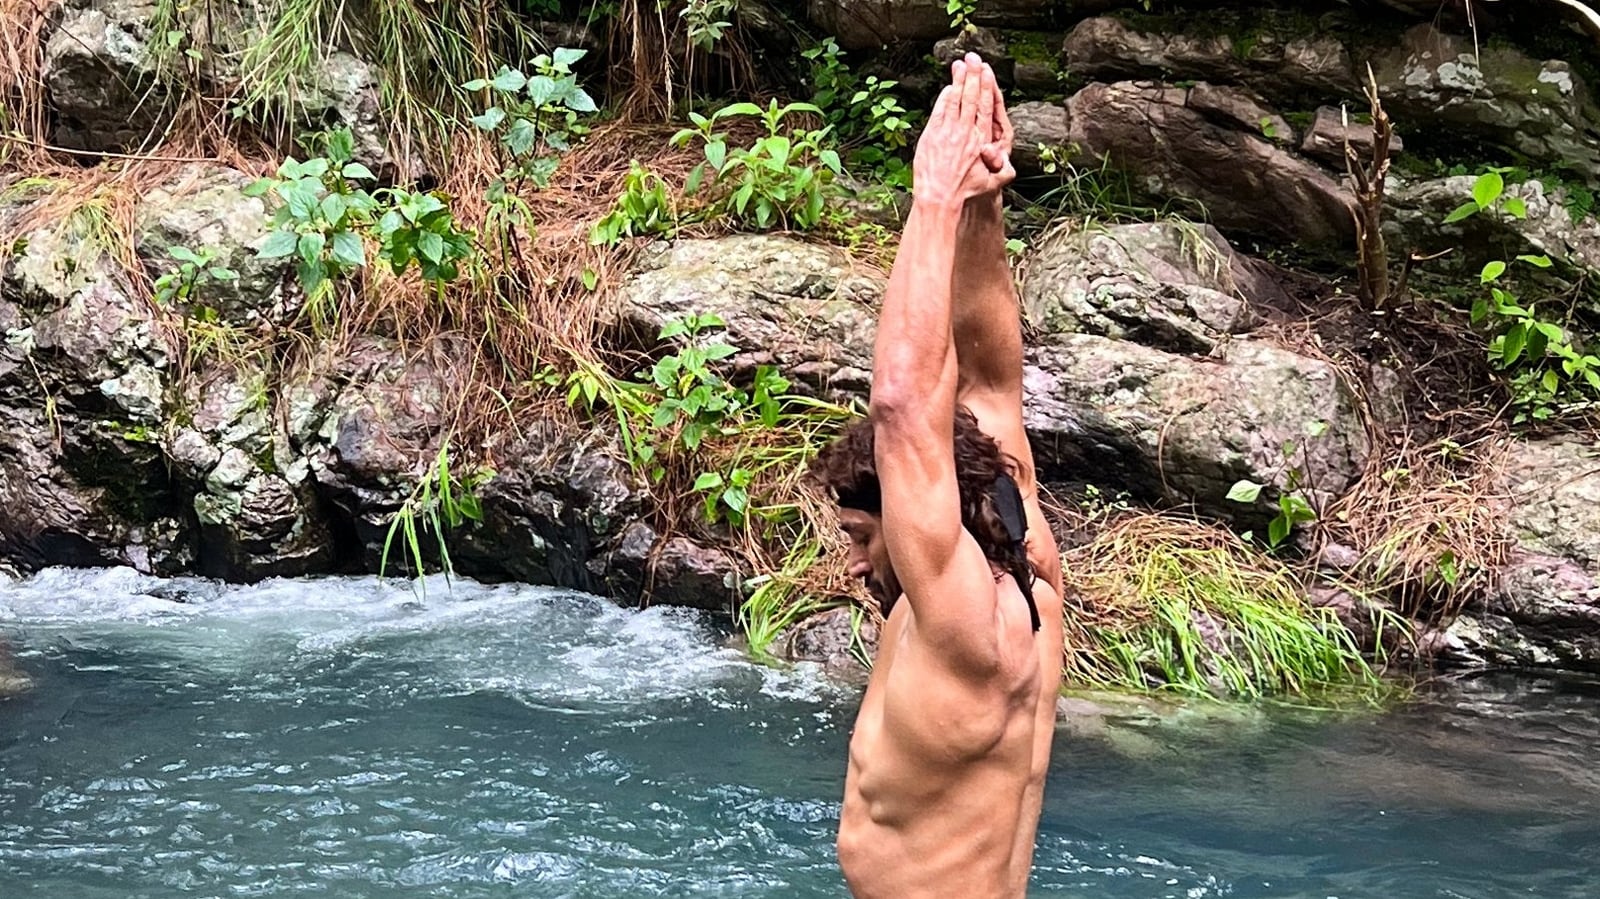 Vidyut Jammwal ditches all his clothes and luxuries for Himalayan retreat | Bollywood